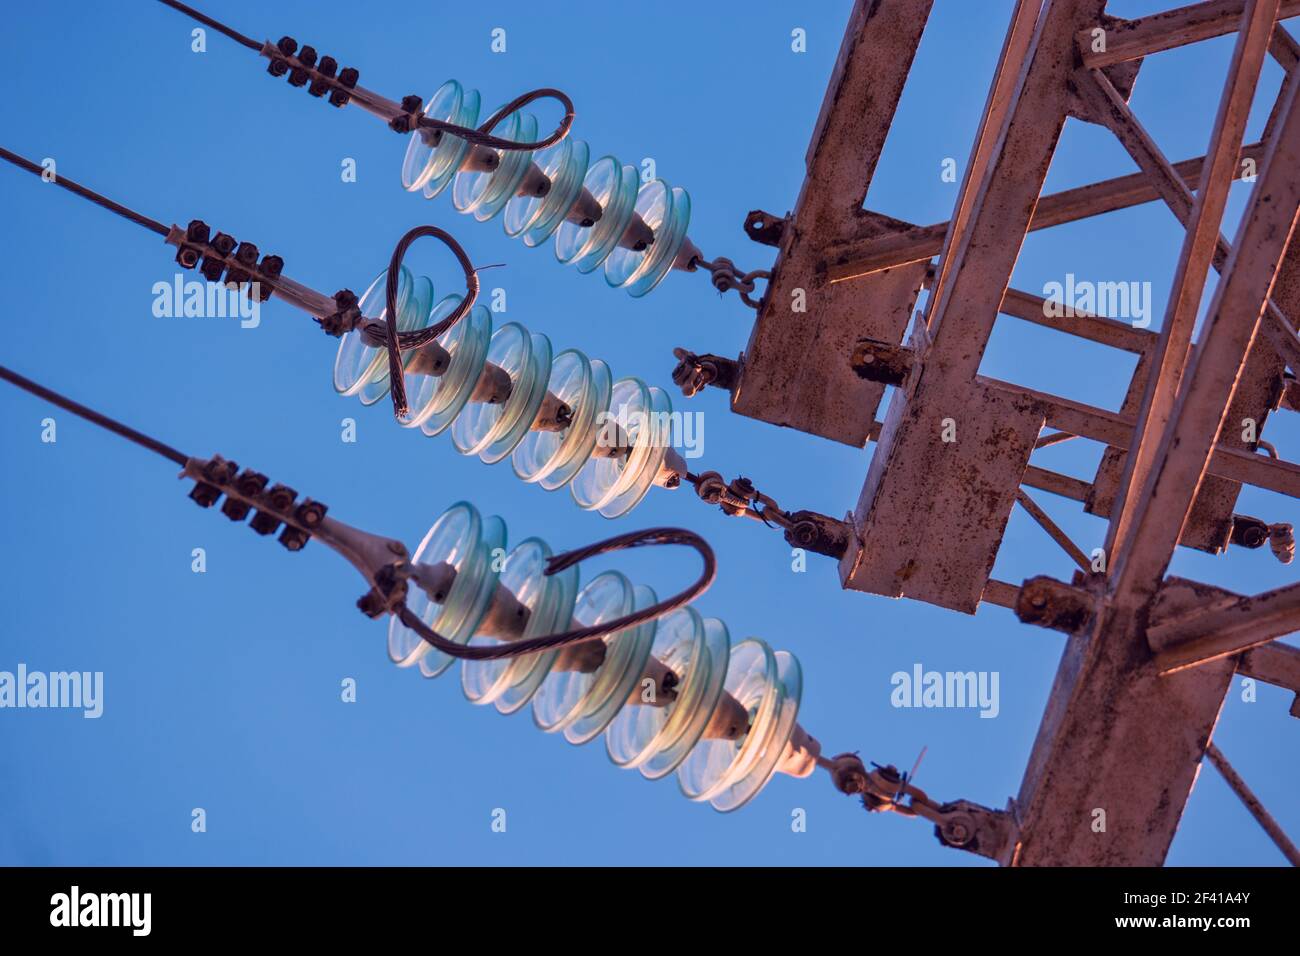 Part of Electricity transmission power line - High voltage tower - with glass insulators in front of the sky. Part of Electricity transmission power line - High voltage tower - with glass insulators Stock Photo